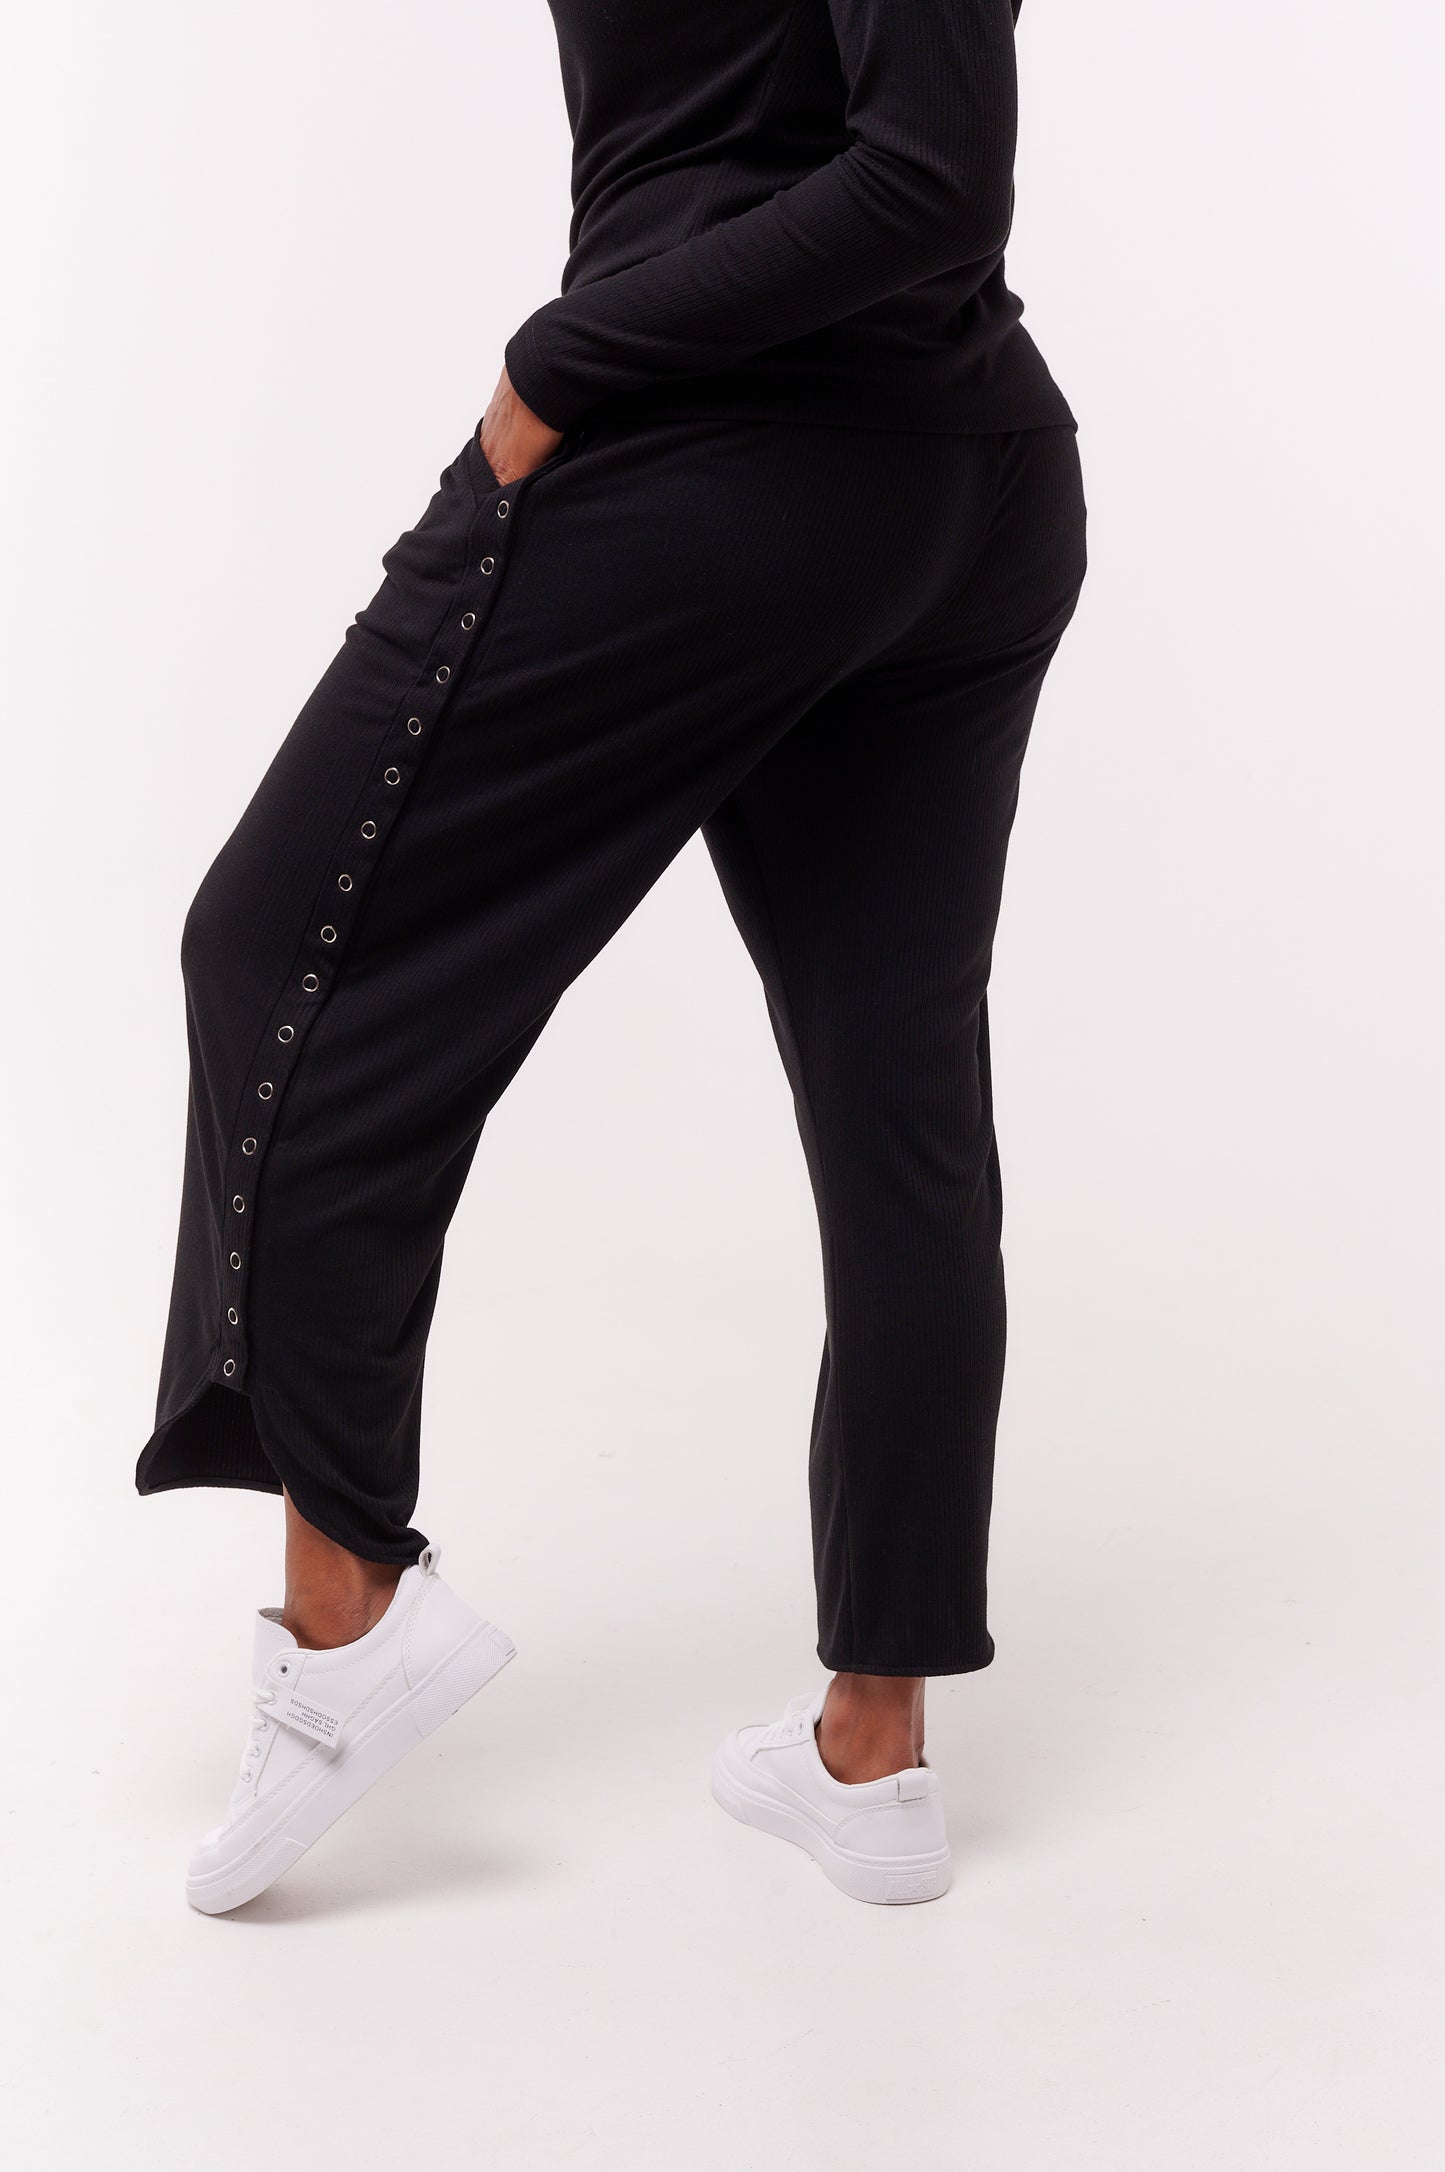 Adaptive Pants with Full Side Seam Opening and Side Loops